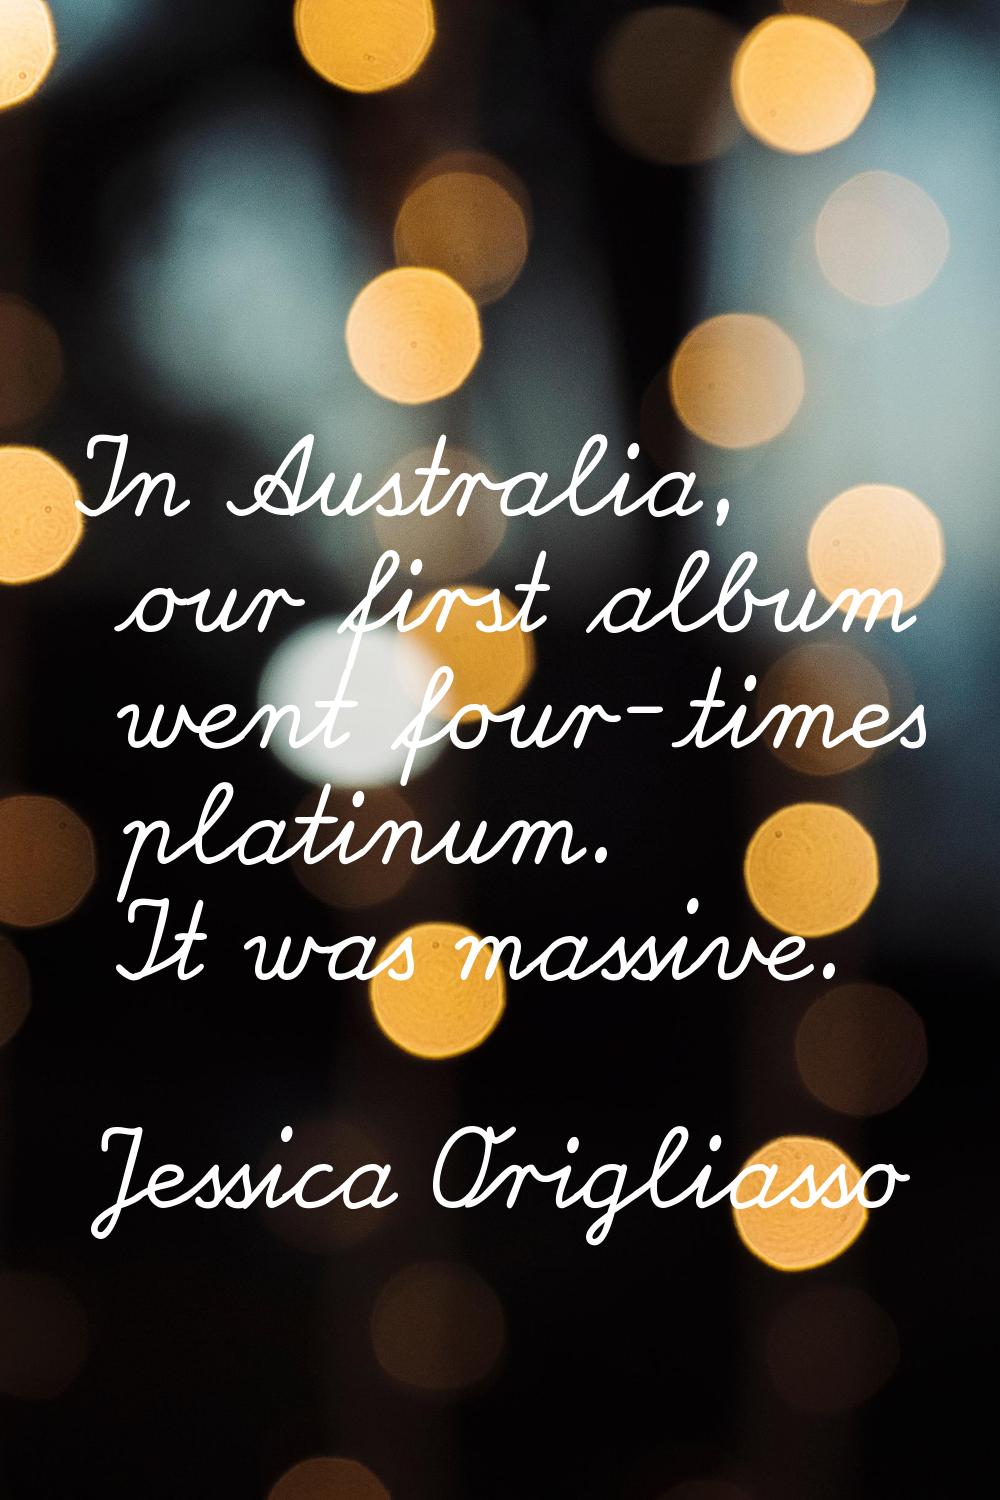 In Australia, our first album went four-times platinum. It was massive.